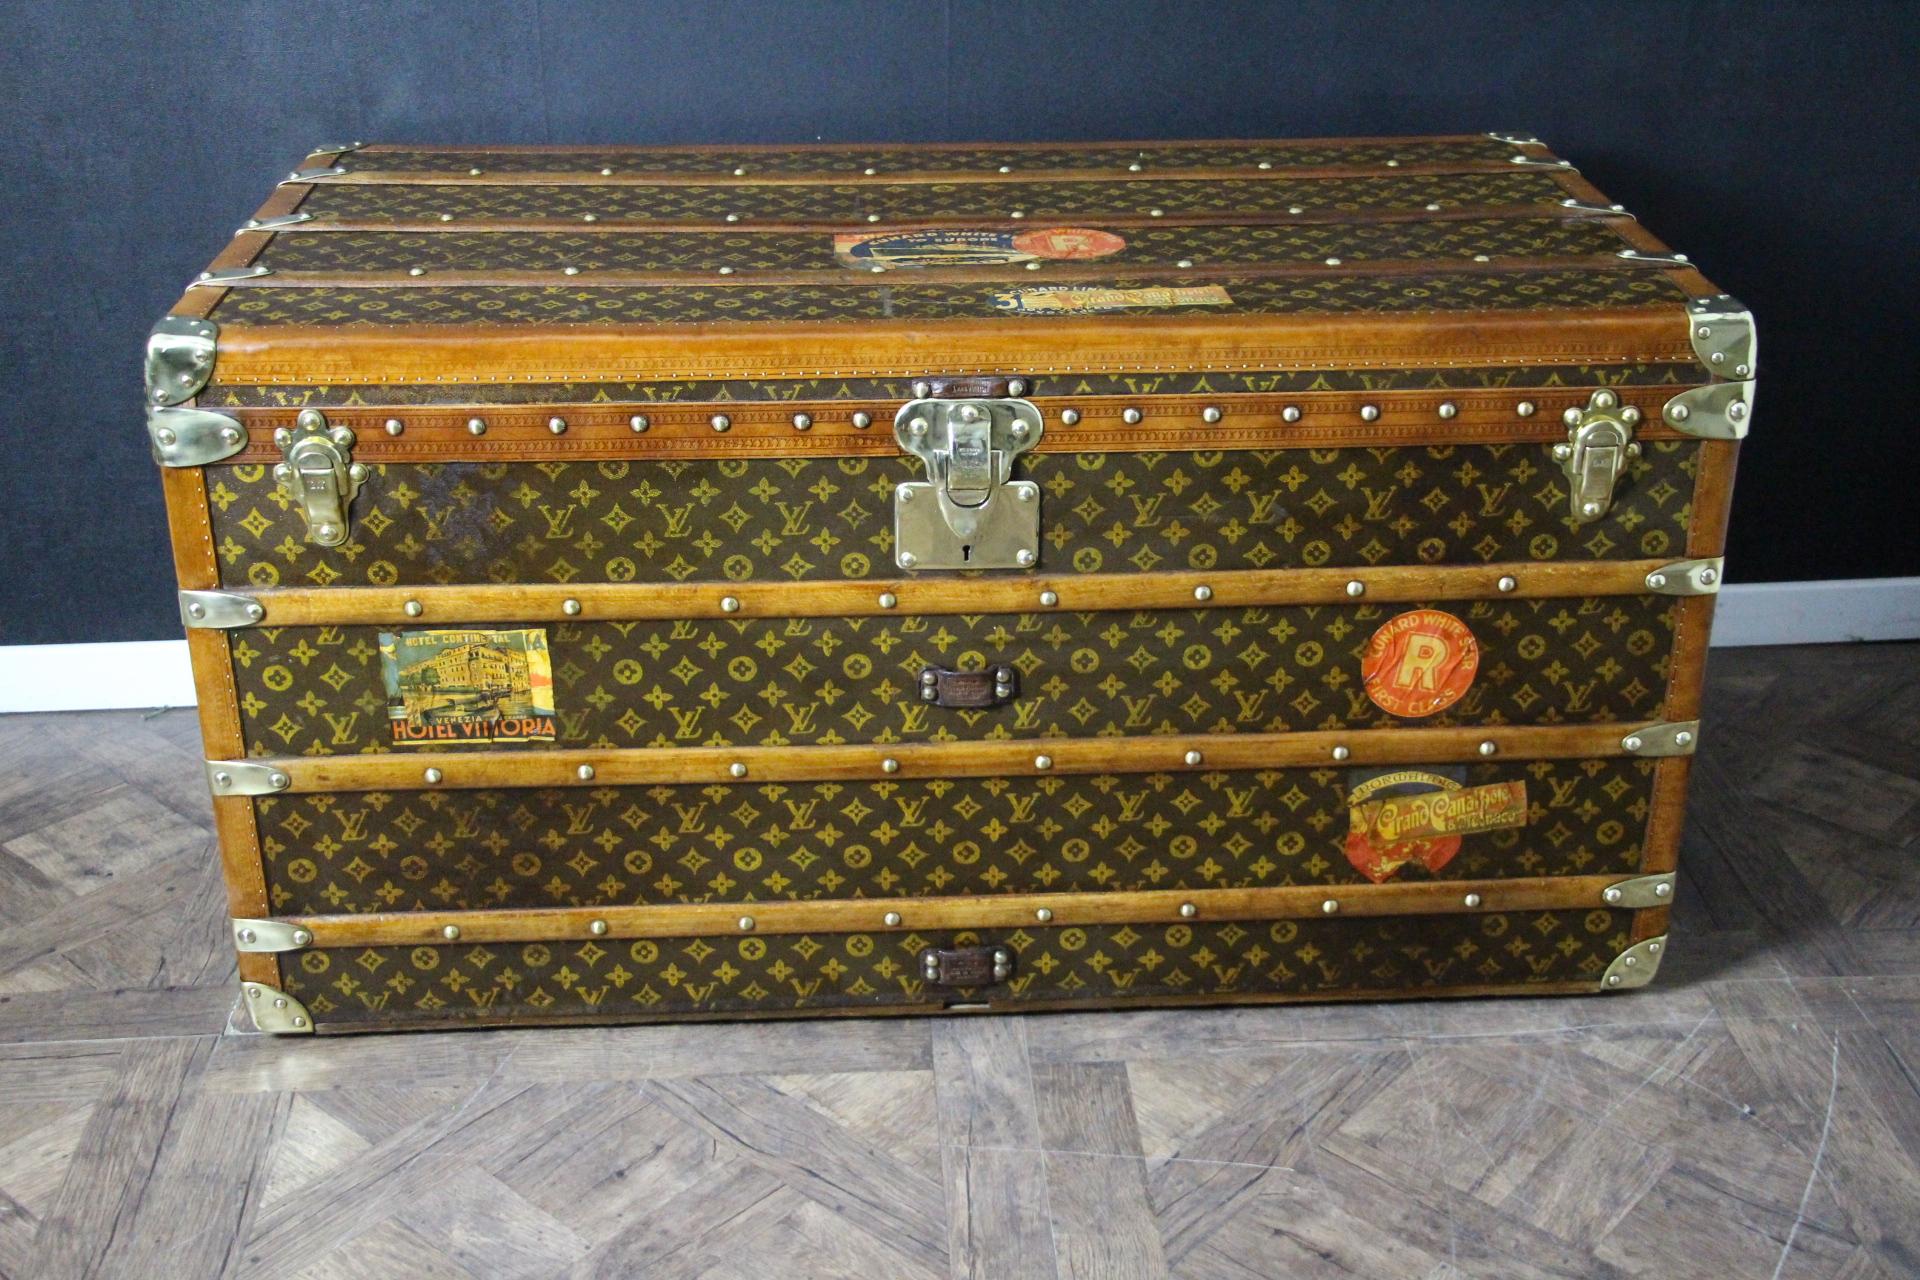 This magnificent Louis Vuitton steamer trunk features stenciled monogram canvas, honey color lozine trim, LV stamped solid brass locks and studs as well as leather side handles and brass corners. It has got a beautiful original patina and is very